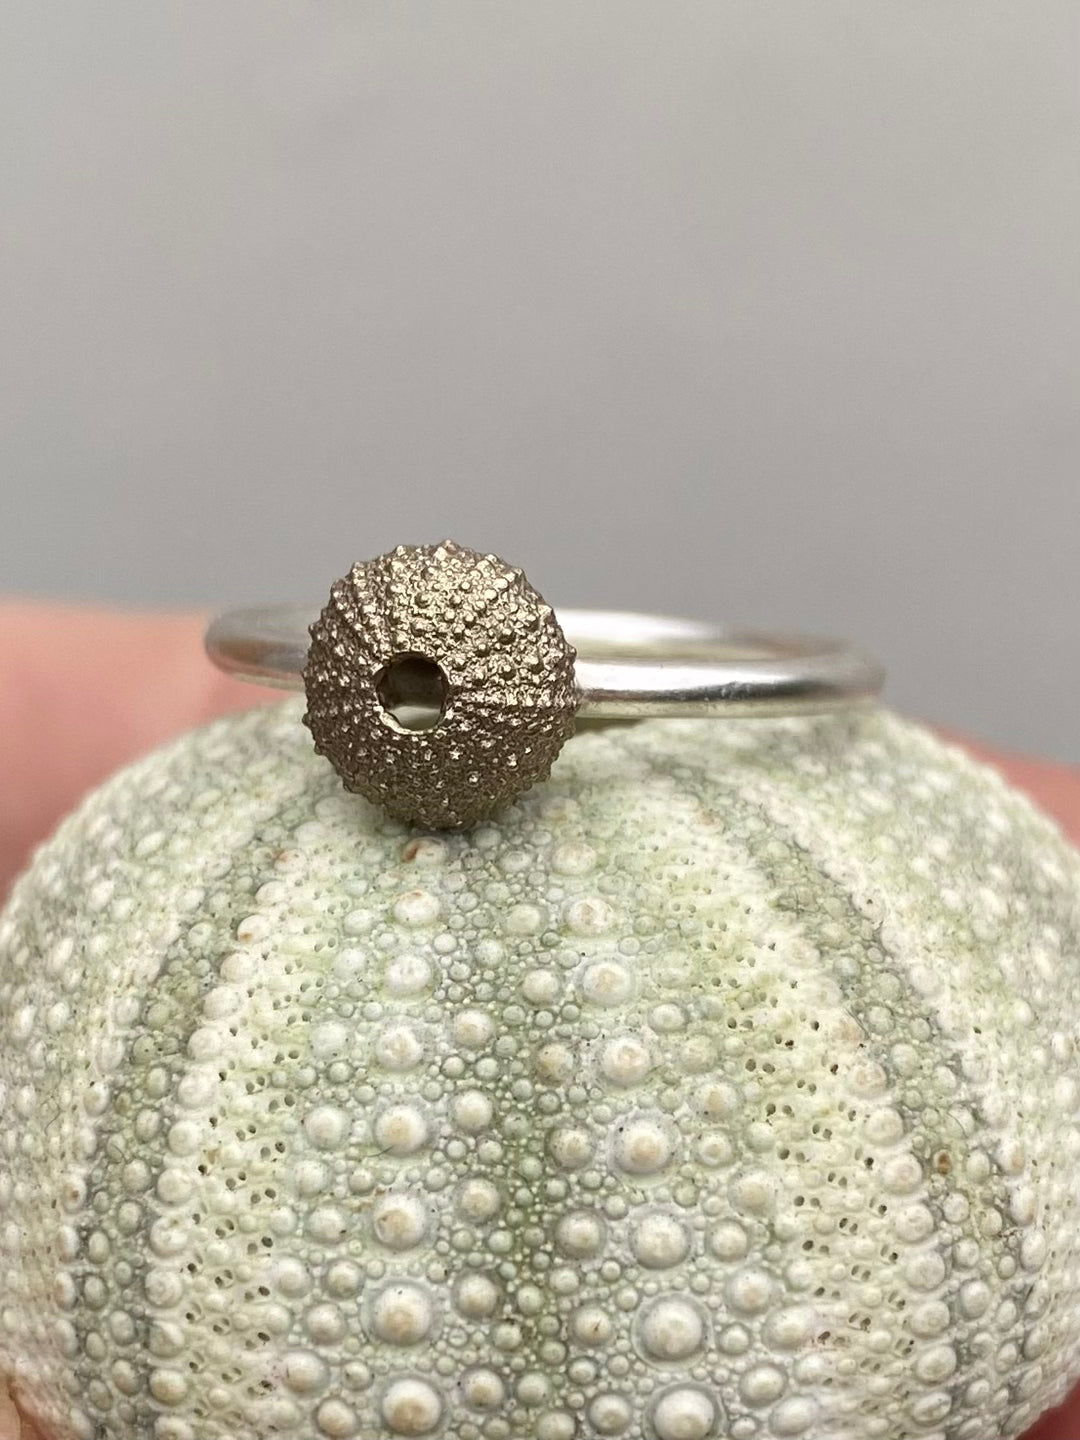 Sterling silver sea urchin ring perched atop a natural sea urchin shell